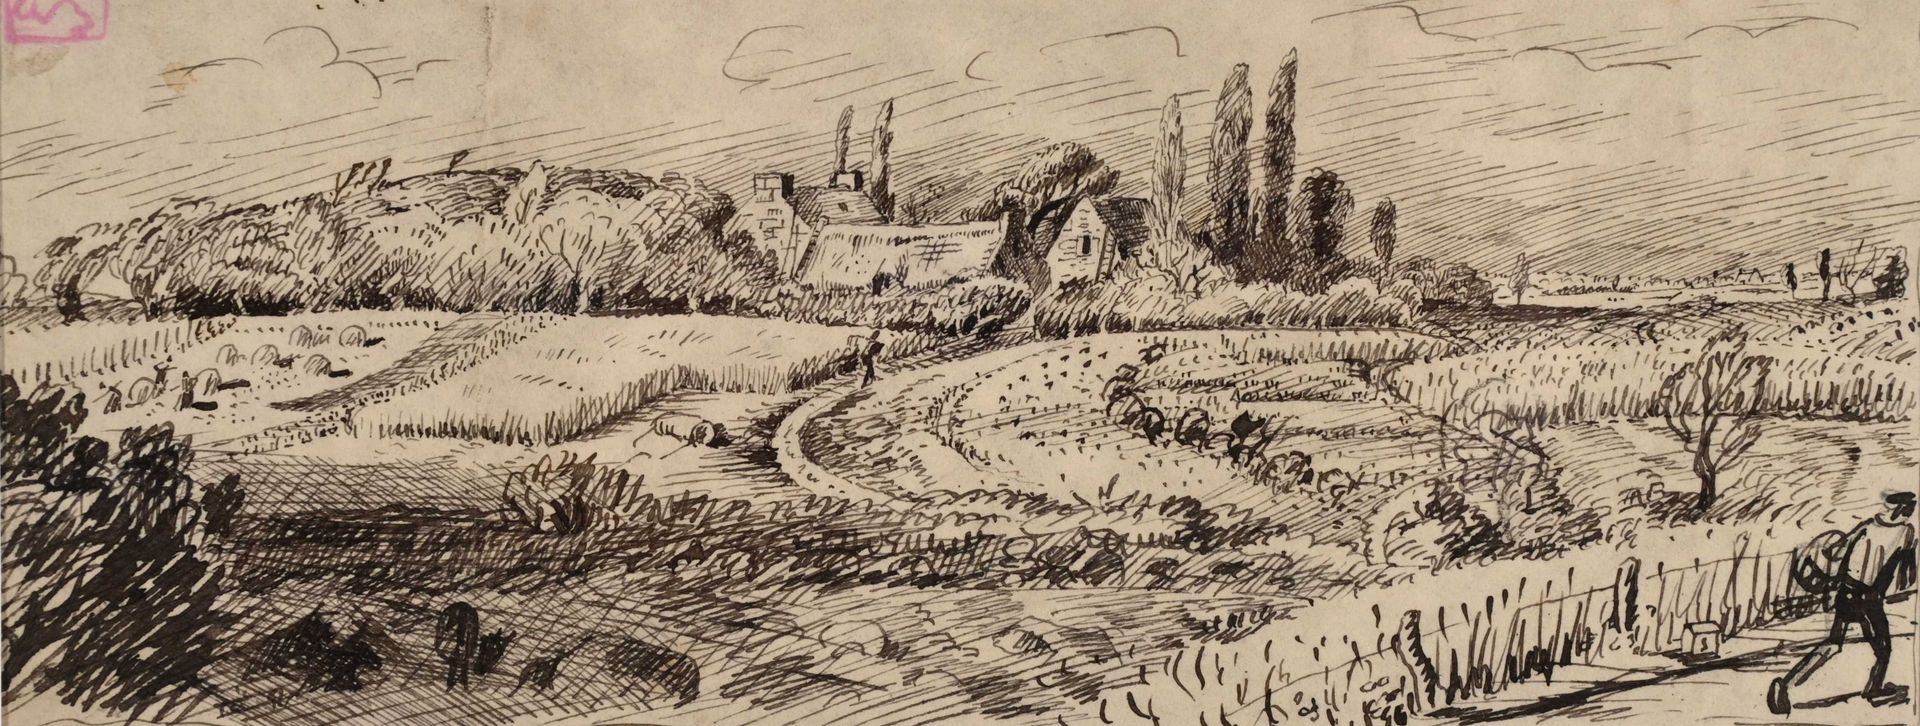 Null Adolphe BEAUFRERE (1876-1960) "Ferme bretonne" encre cahg 8.5x22